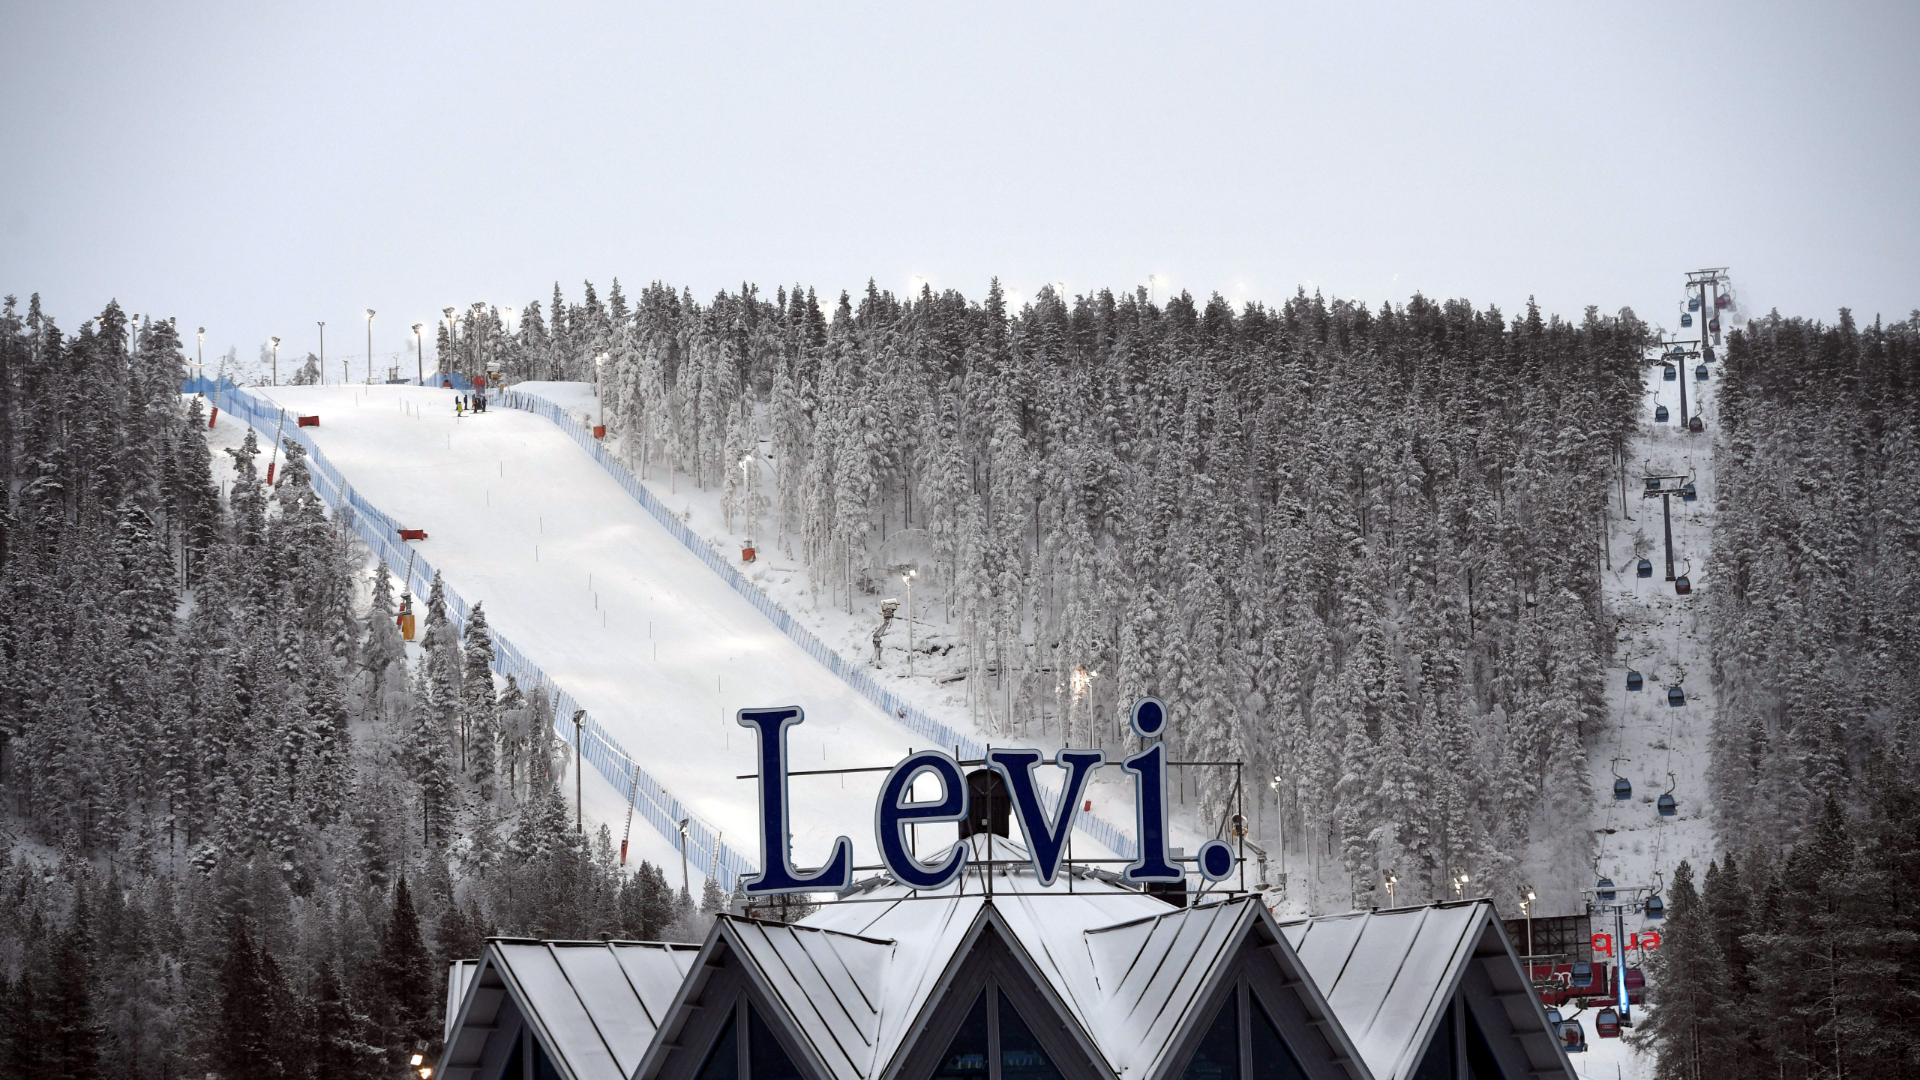 Finnish Lapland ski resort to snow for next season after closing earlier due to COVID-19 – Eye on the Arctic